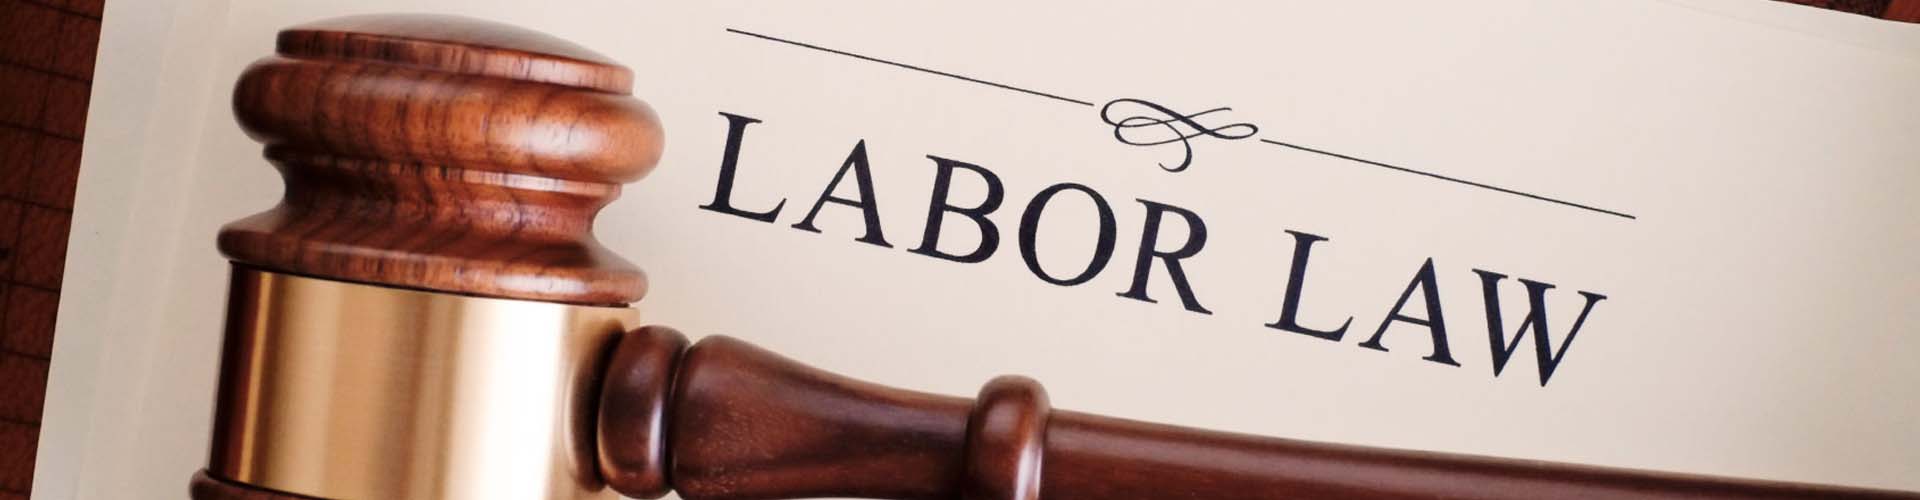 Labor law printed on paper in front of judges gavel